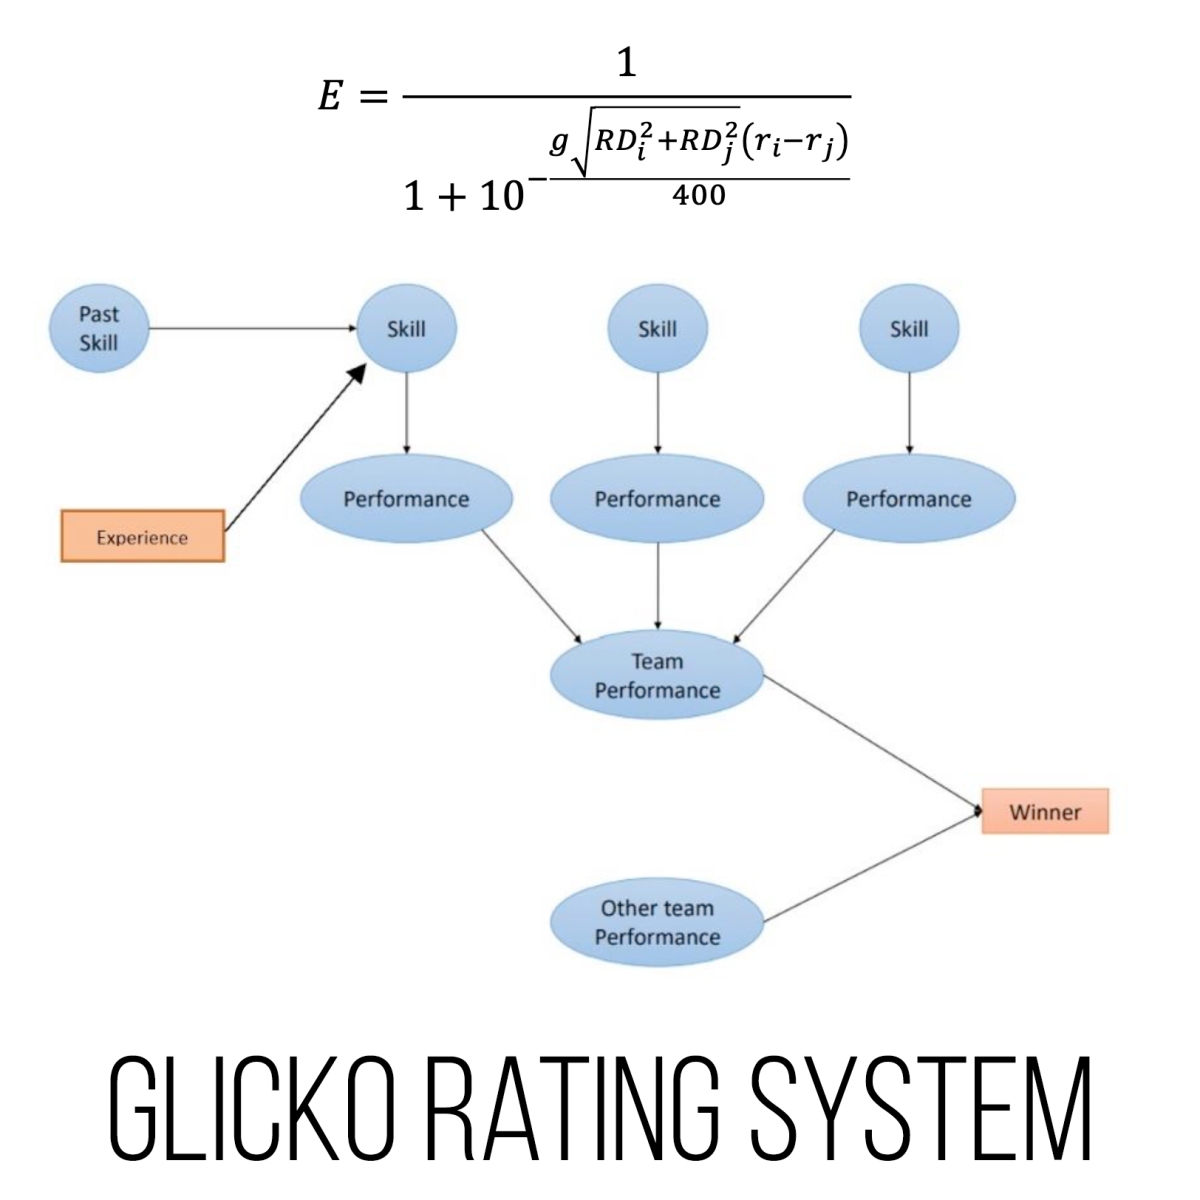 Elo and Glicko Standardised Rating Systems – TOM ROCKS MATHS